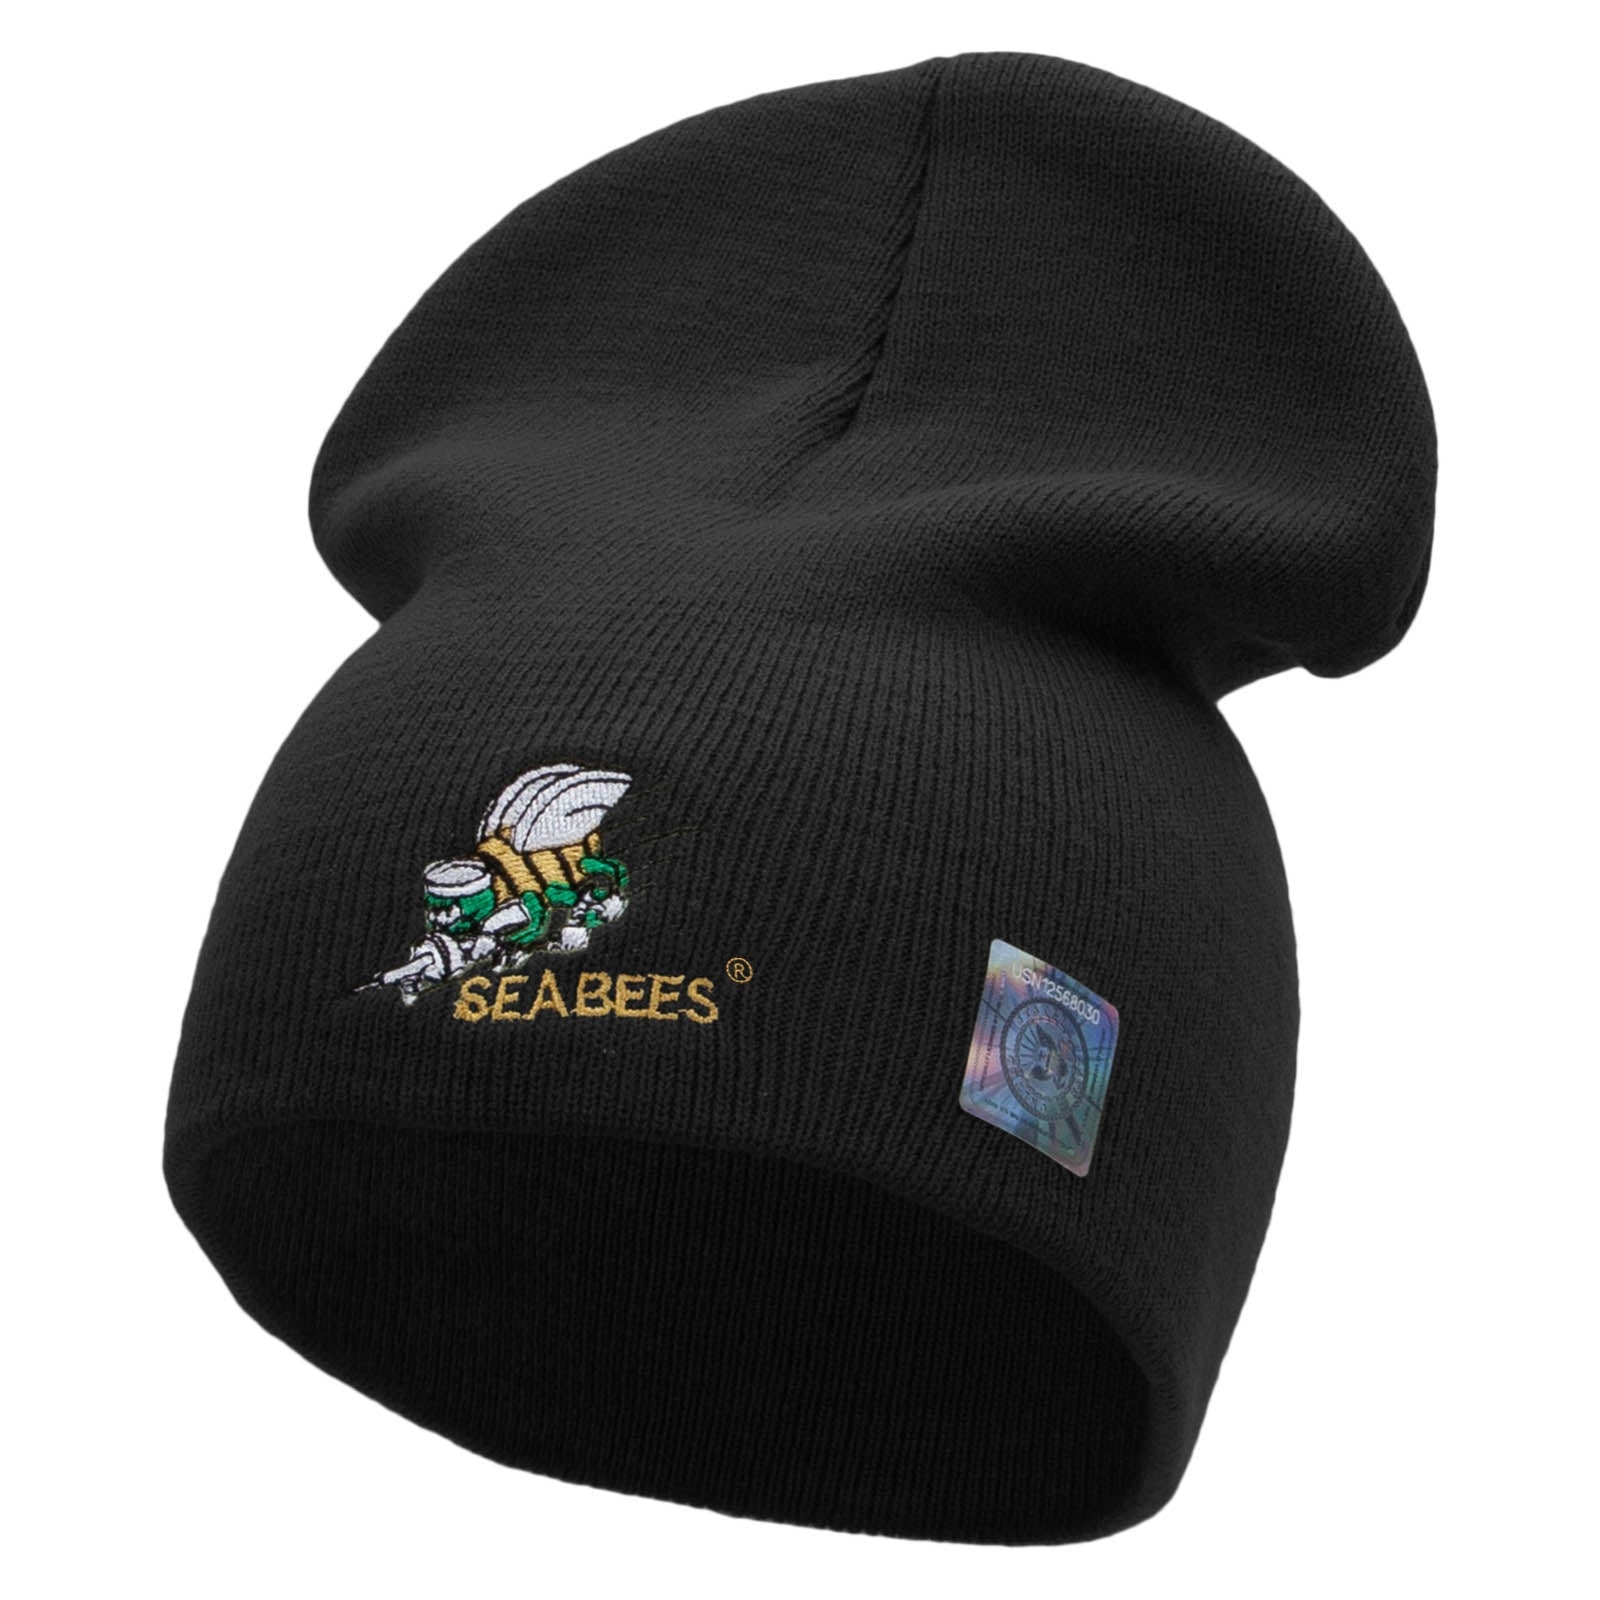 Licensed Navy Seabees Symbol Embroidered Short Beanie Made in USA - Black OSFM